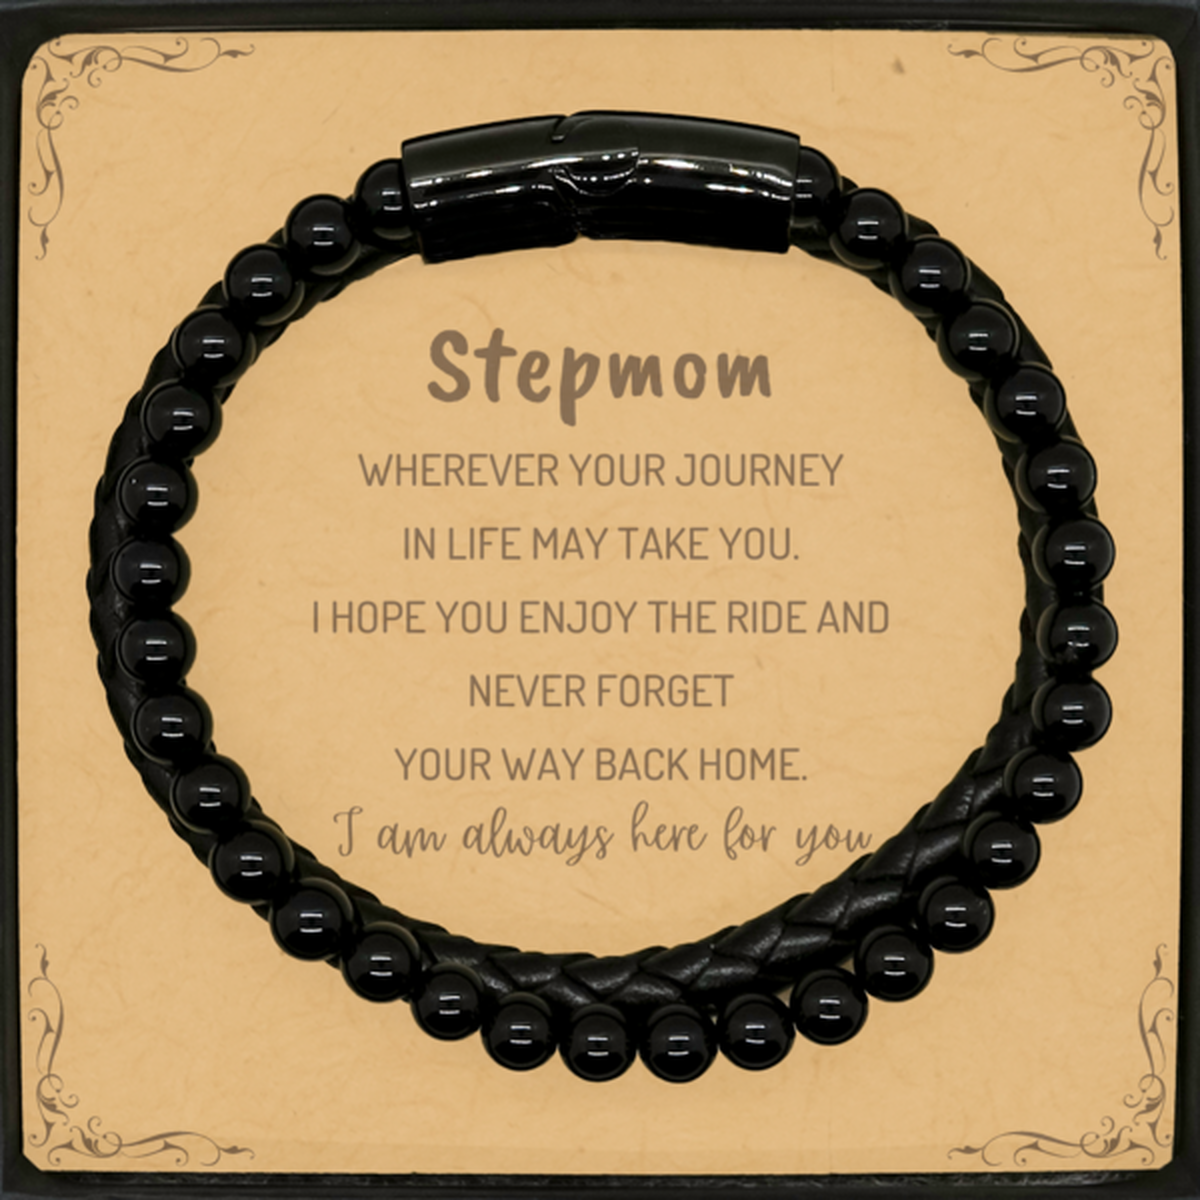 Stepmom wherever your journey in life may take you, I am always here for you Stepmom Stone Leather Bracelets, Awesome Christmas Gifts For Stepmom Message Card, Stepmom Birthday Gifts for Men Women Family Loved One